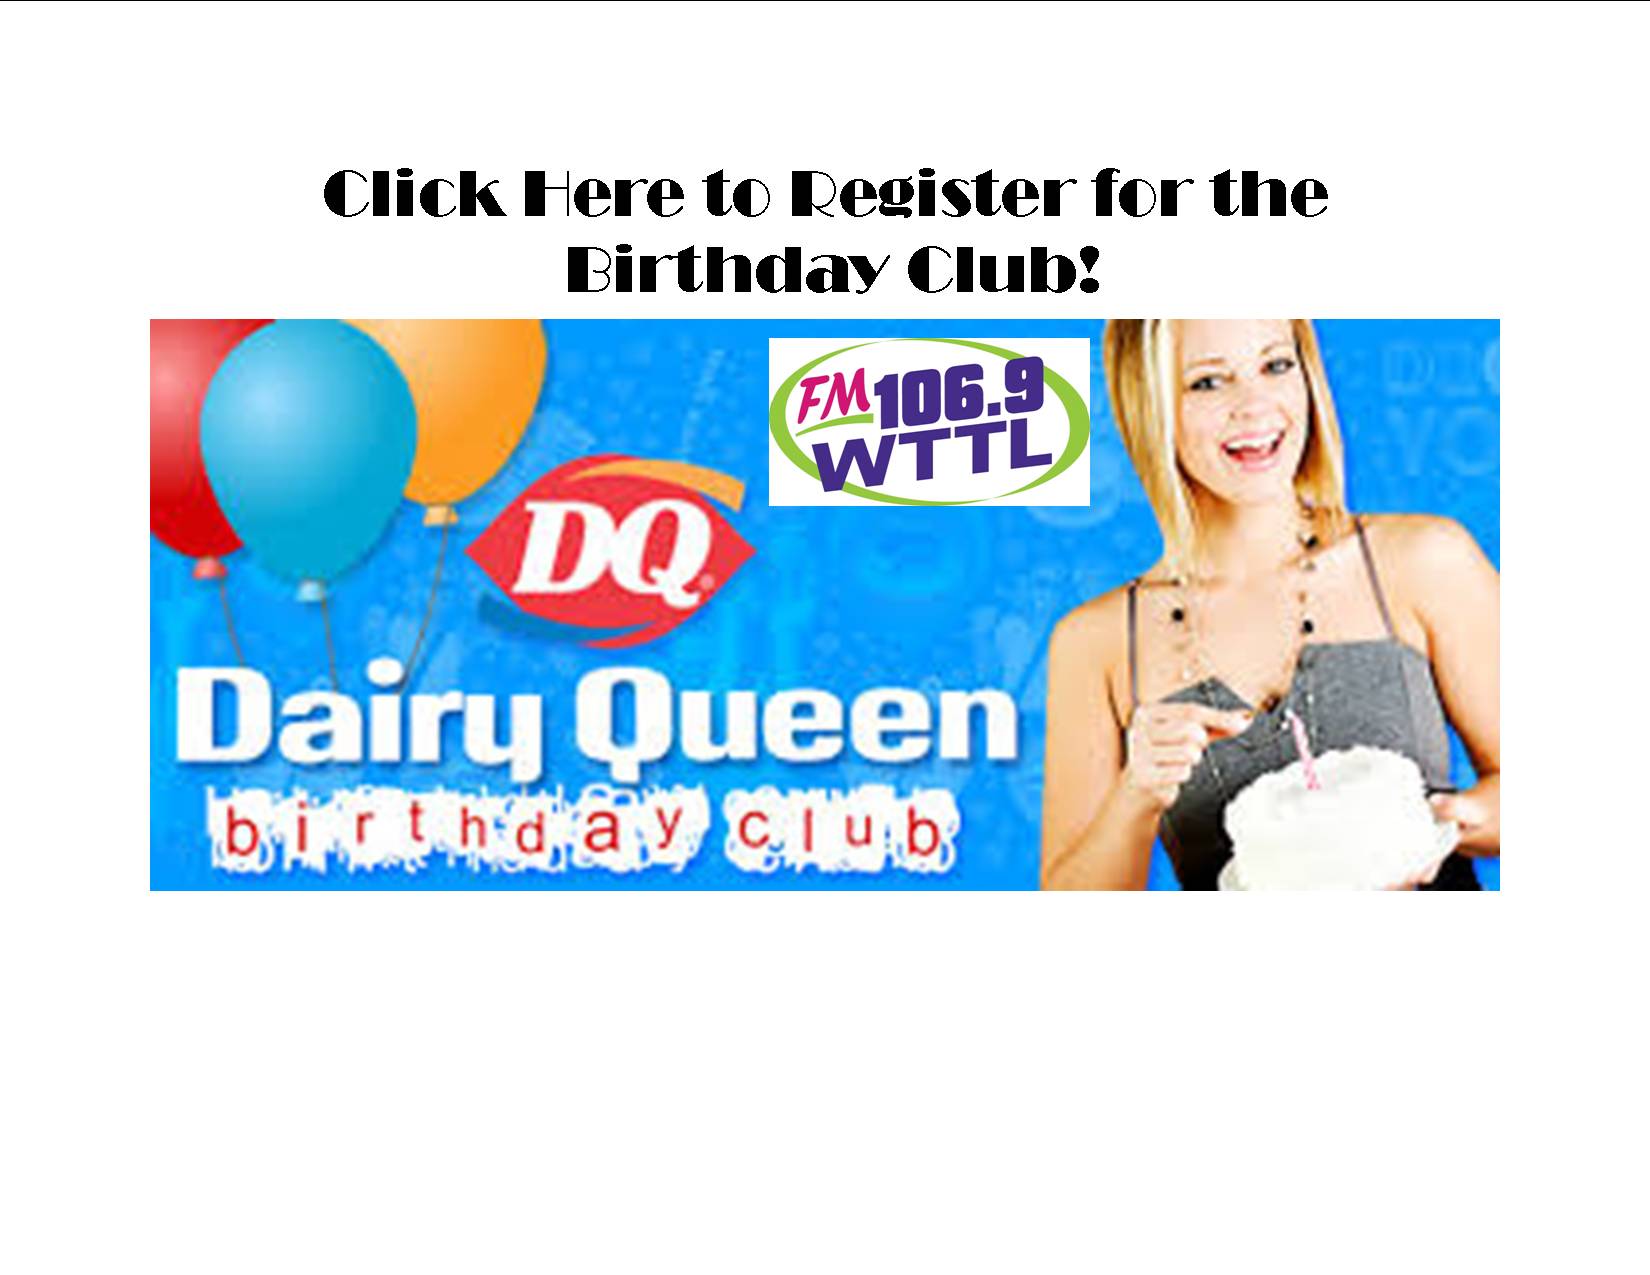 Join the Birthday Club